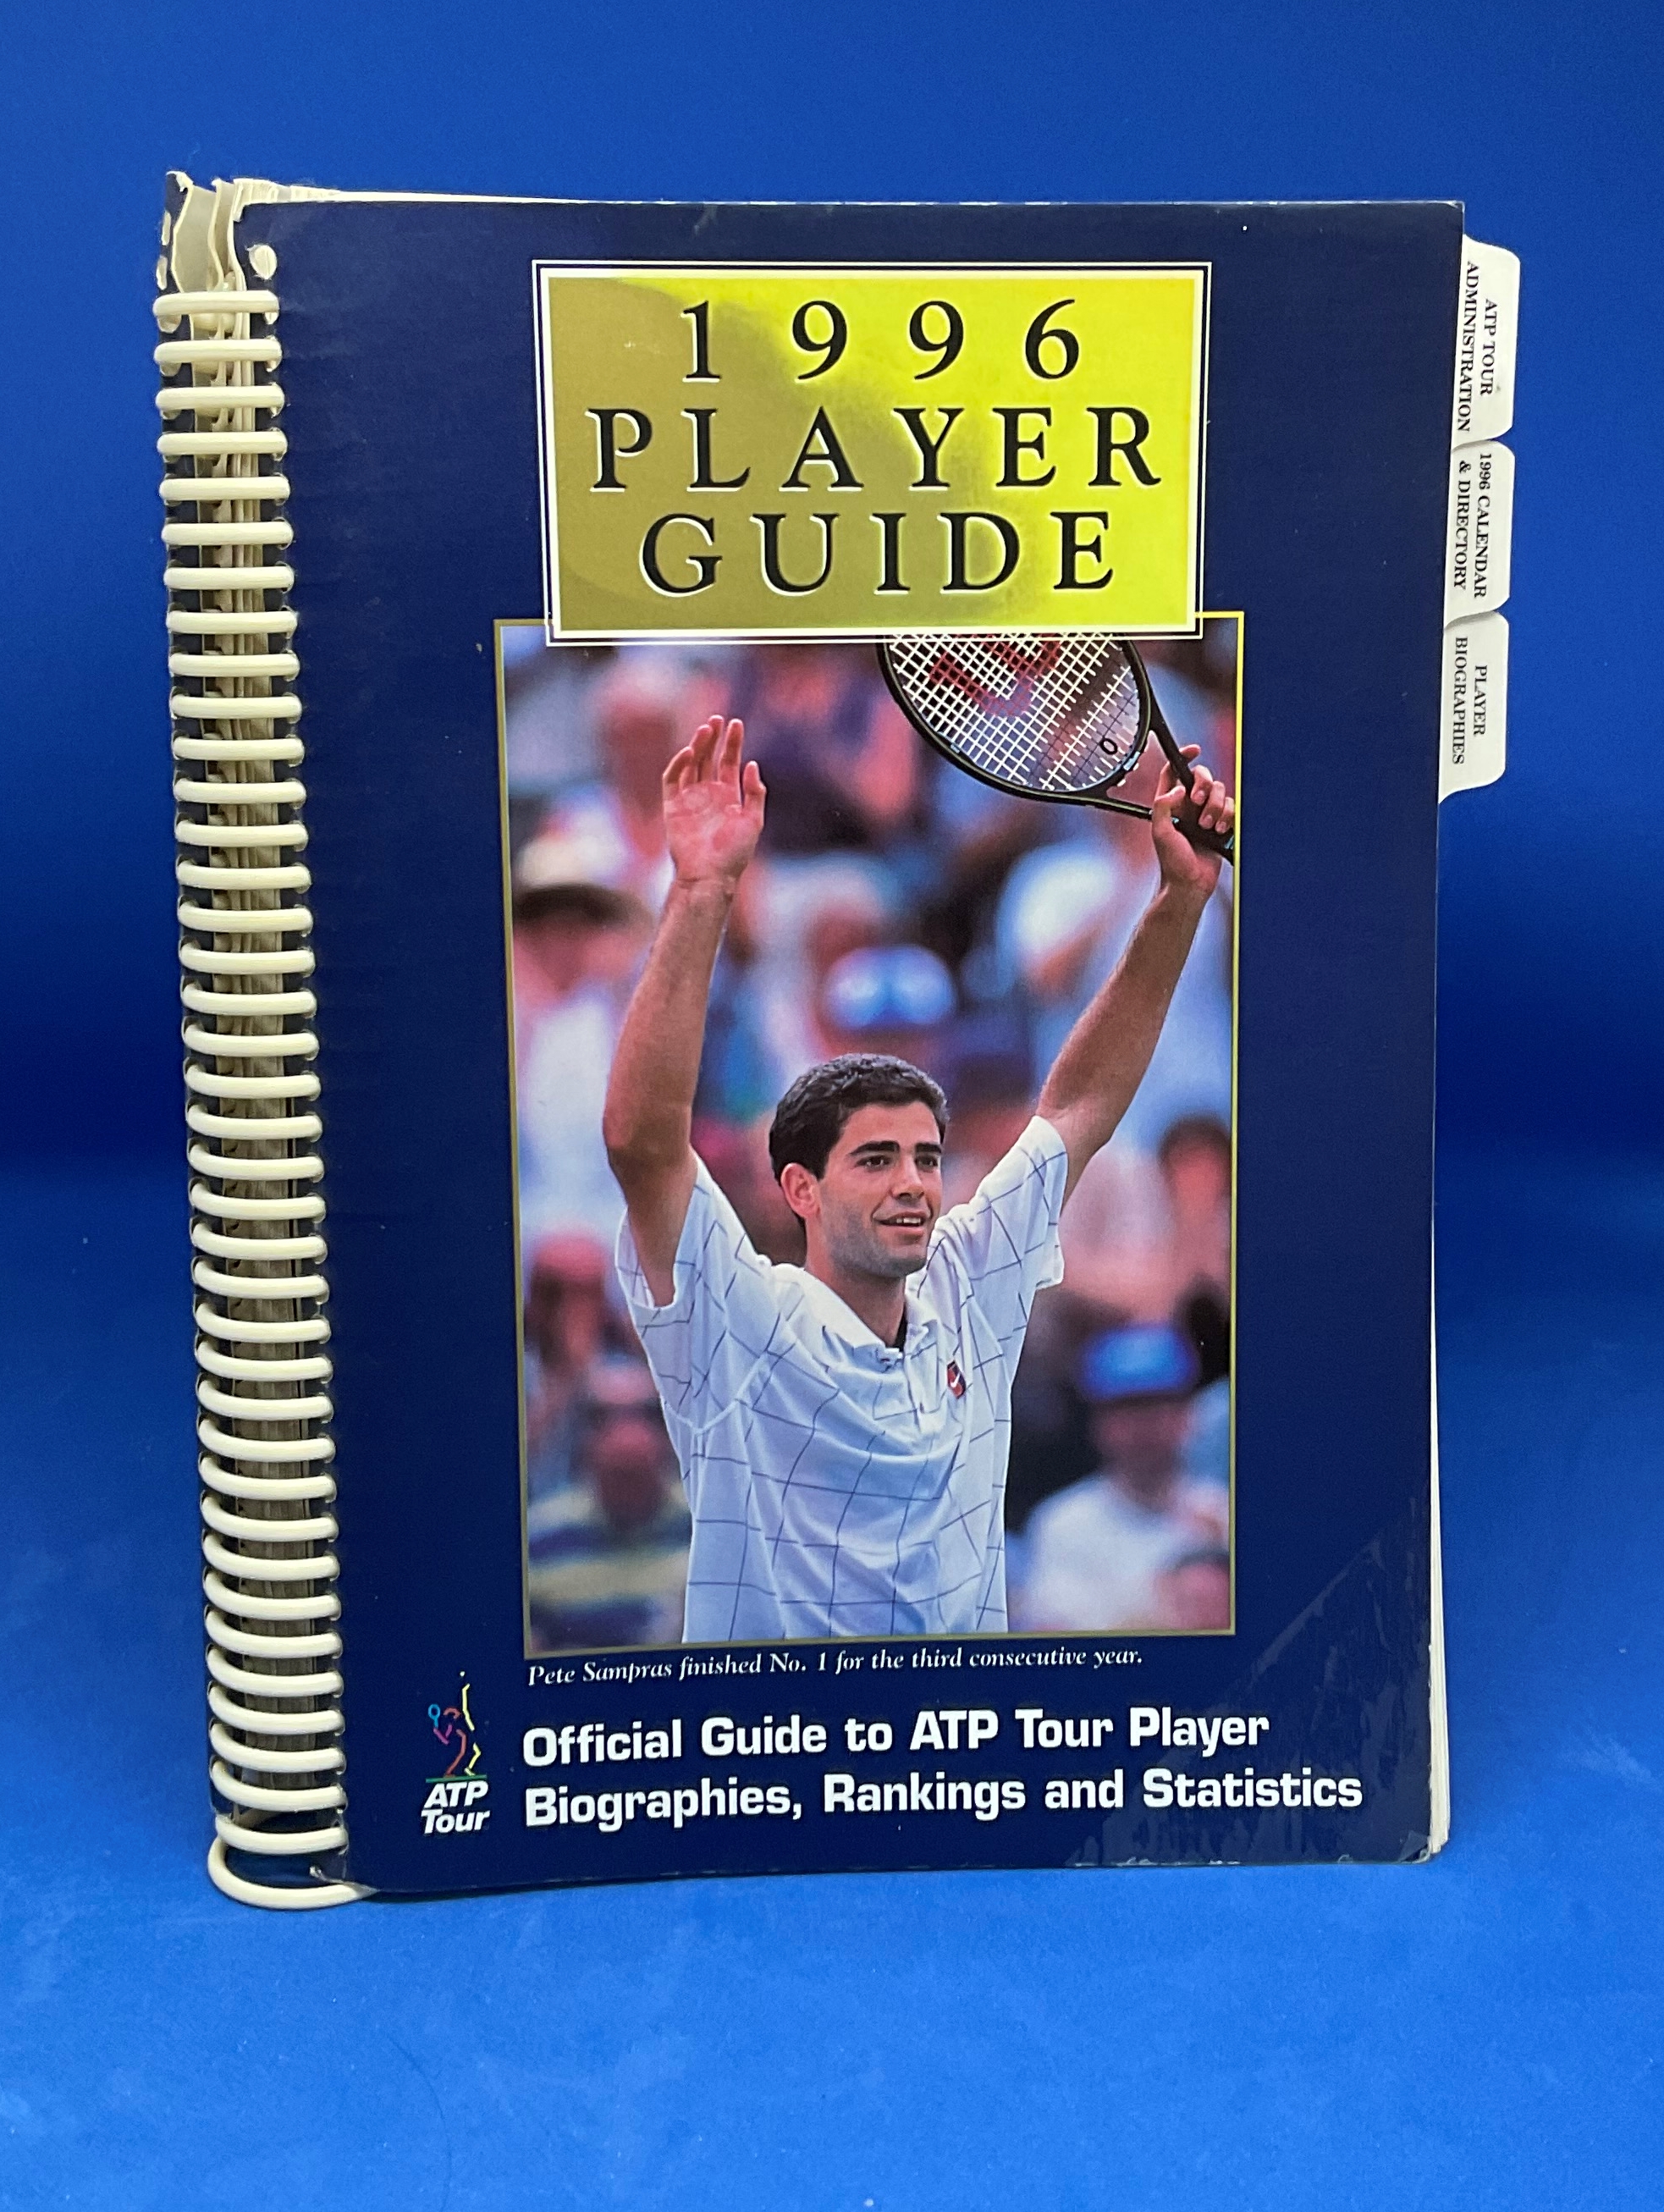 1996 ATP Player Guide Signed by 9 players on their respective biography pages. It is signed by: - Image 4 of 4